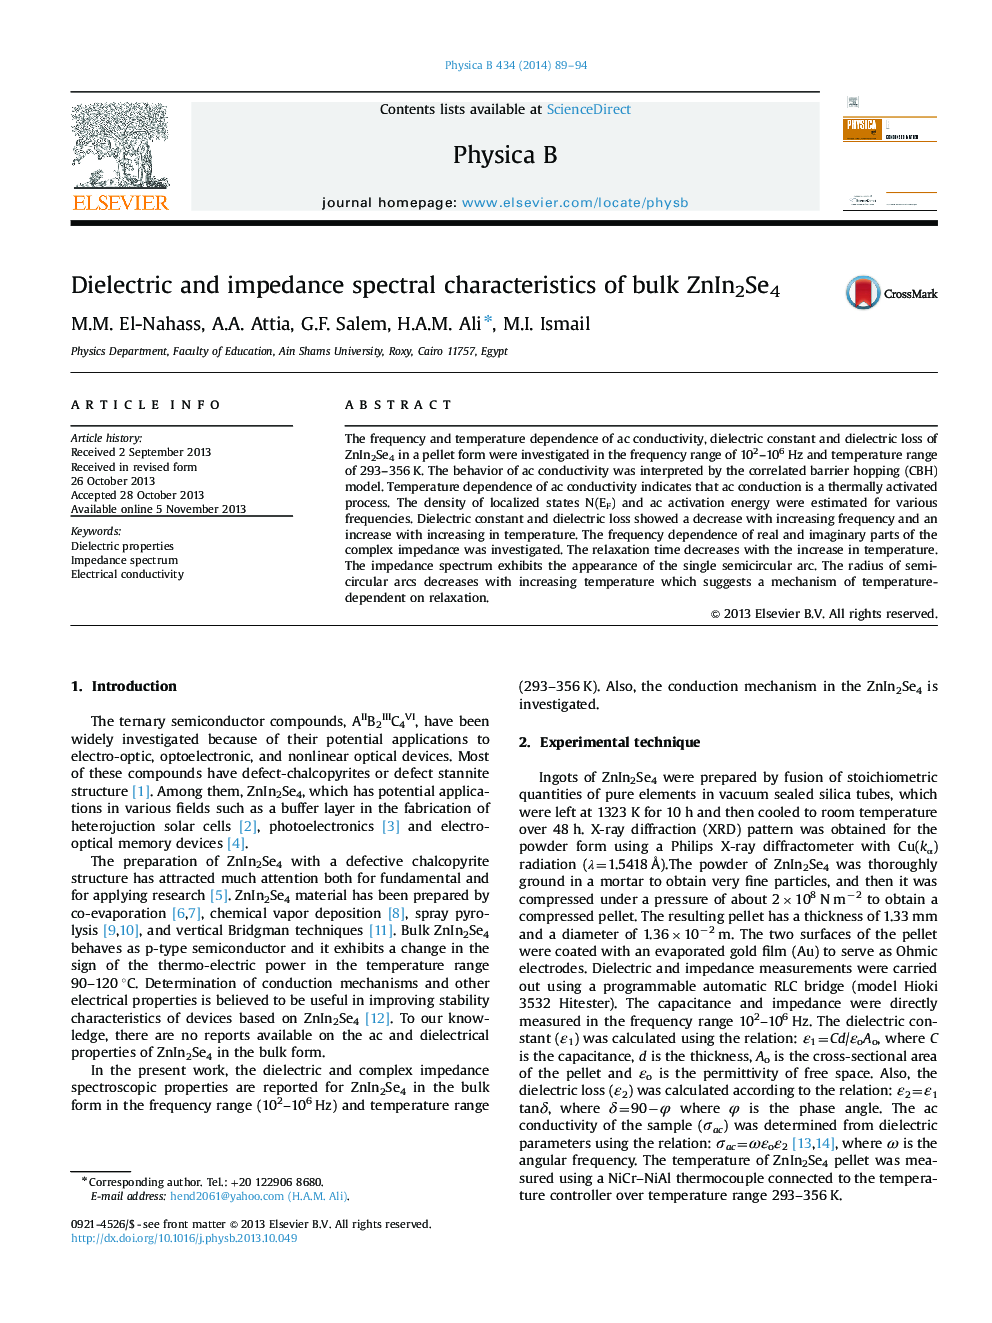 Dielectric and impedance spectral characteristics of bulk ZnIn2Se4